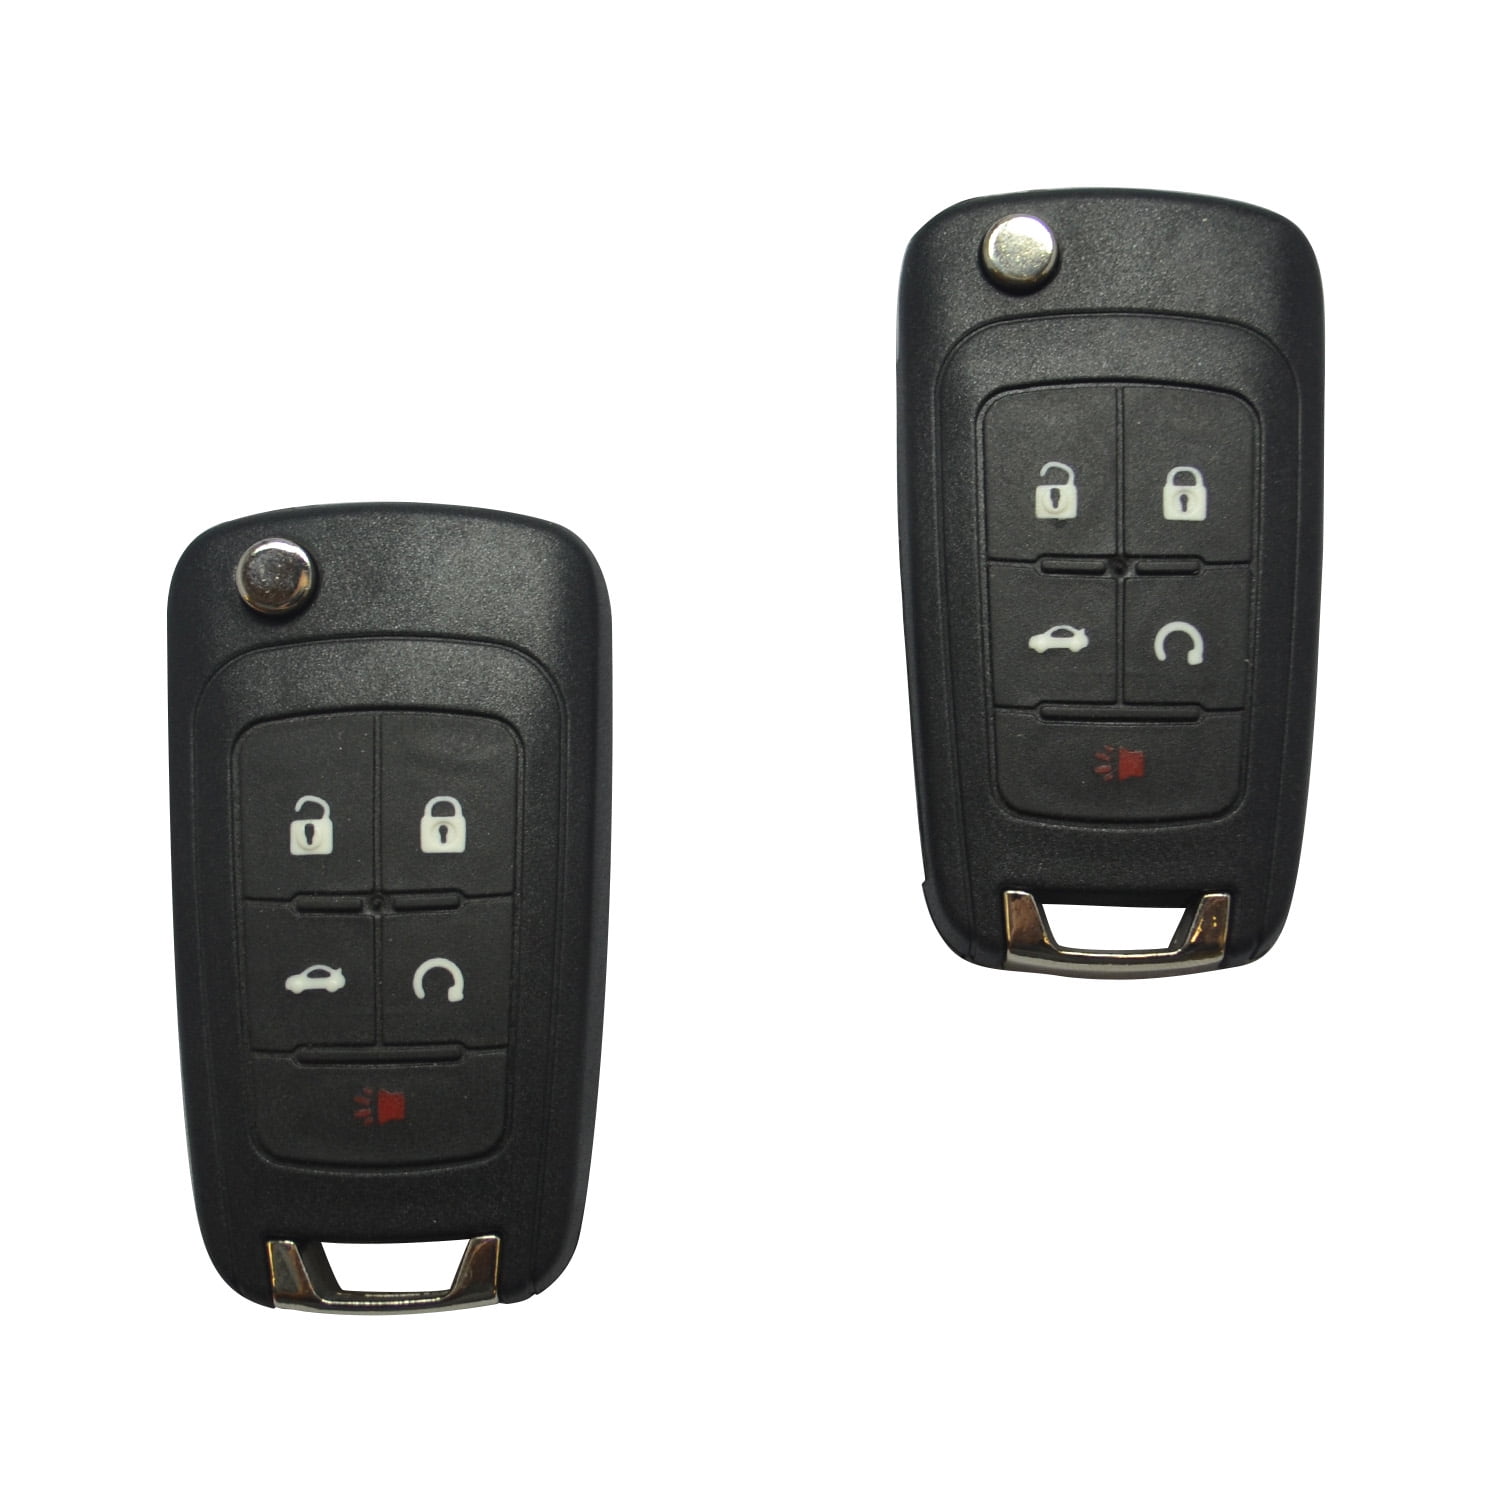 2 New Replacement Keyless Entry Remotes Fob for GM Alarm 5 Button Transmitter 